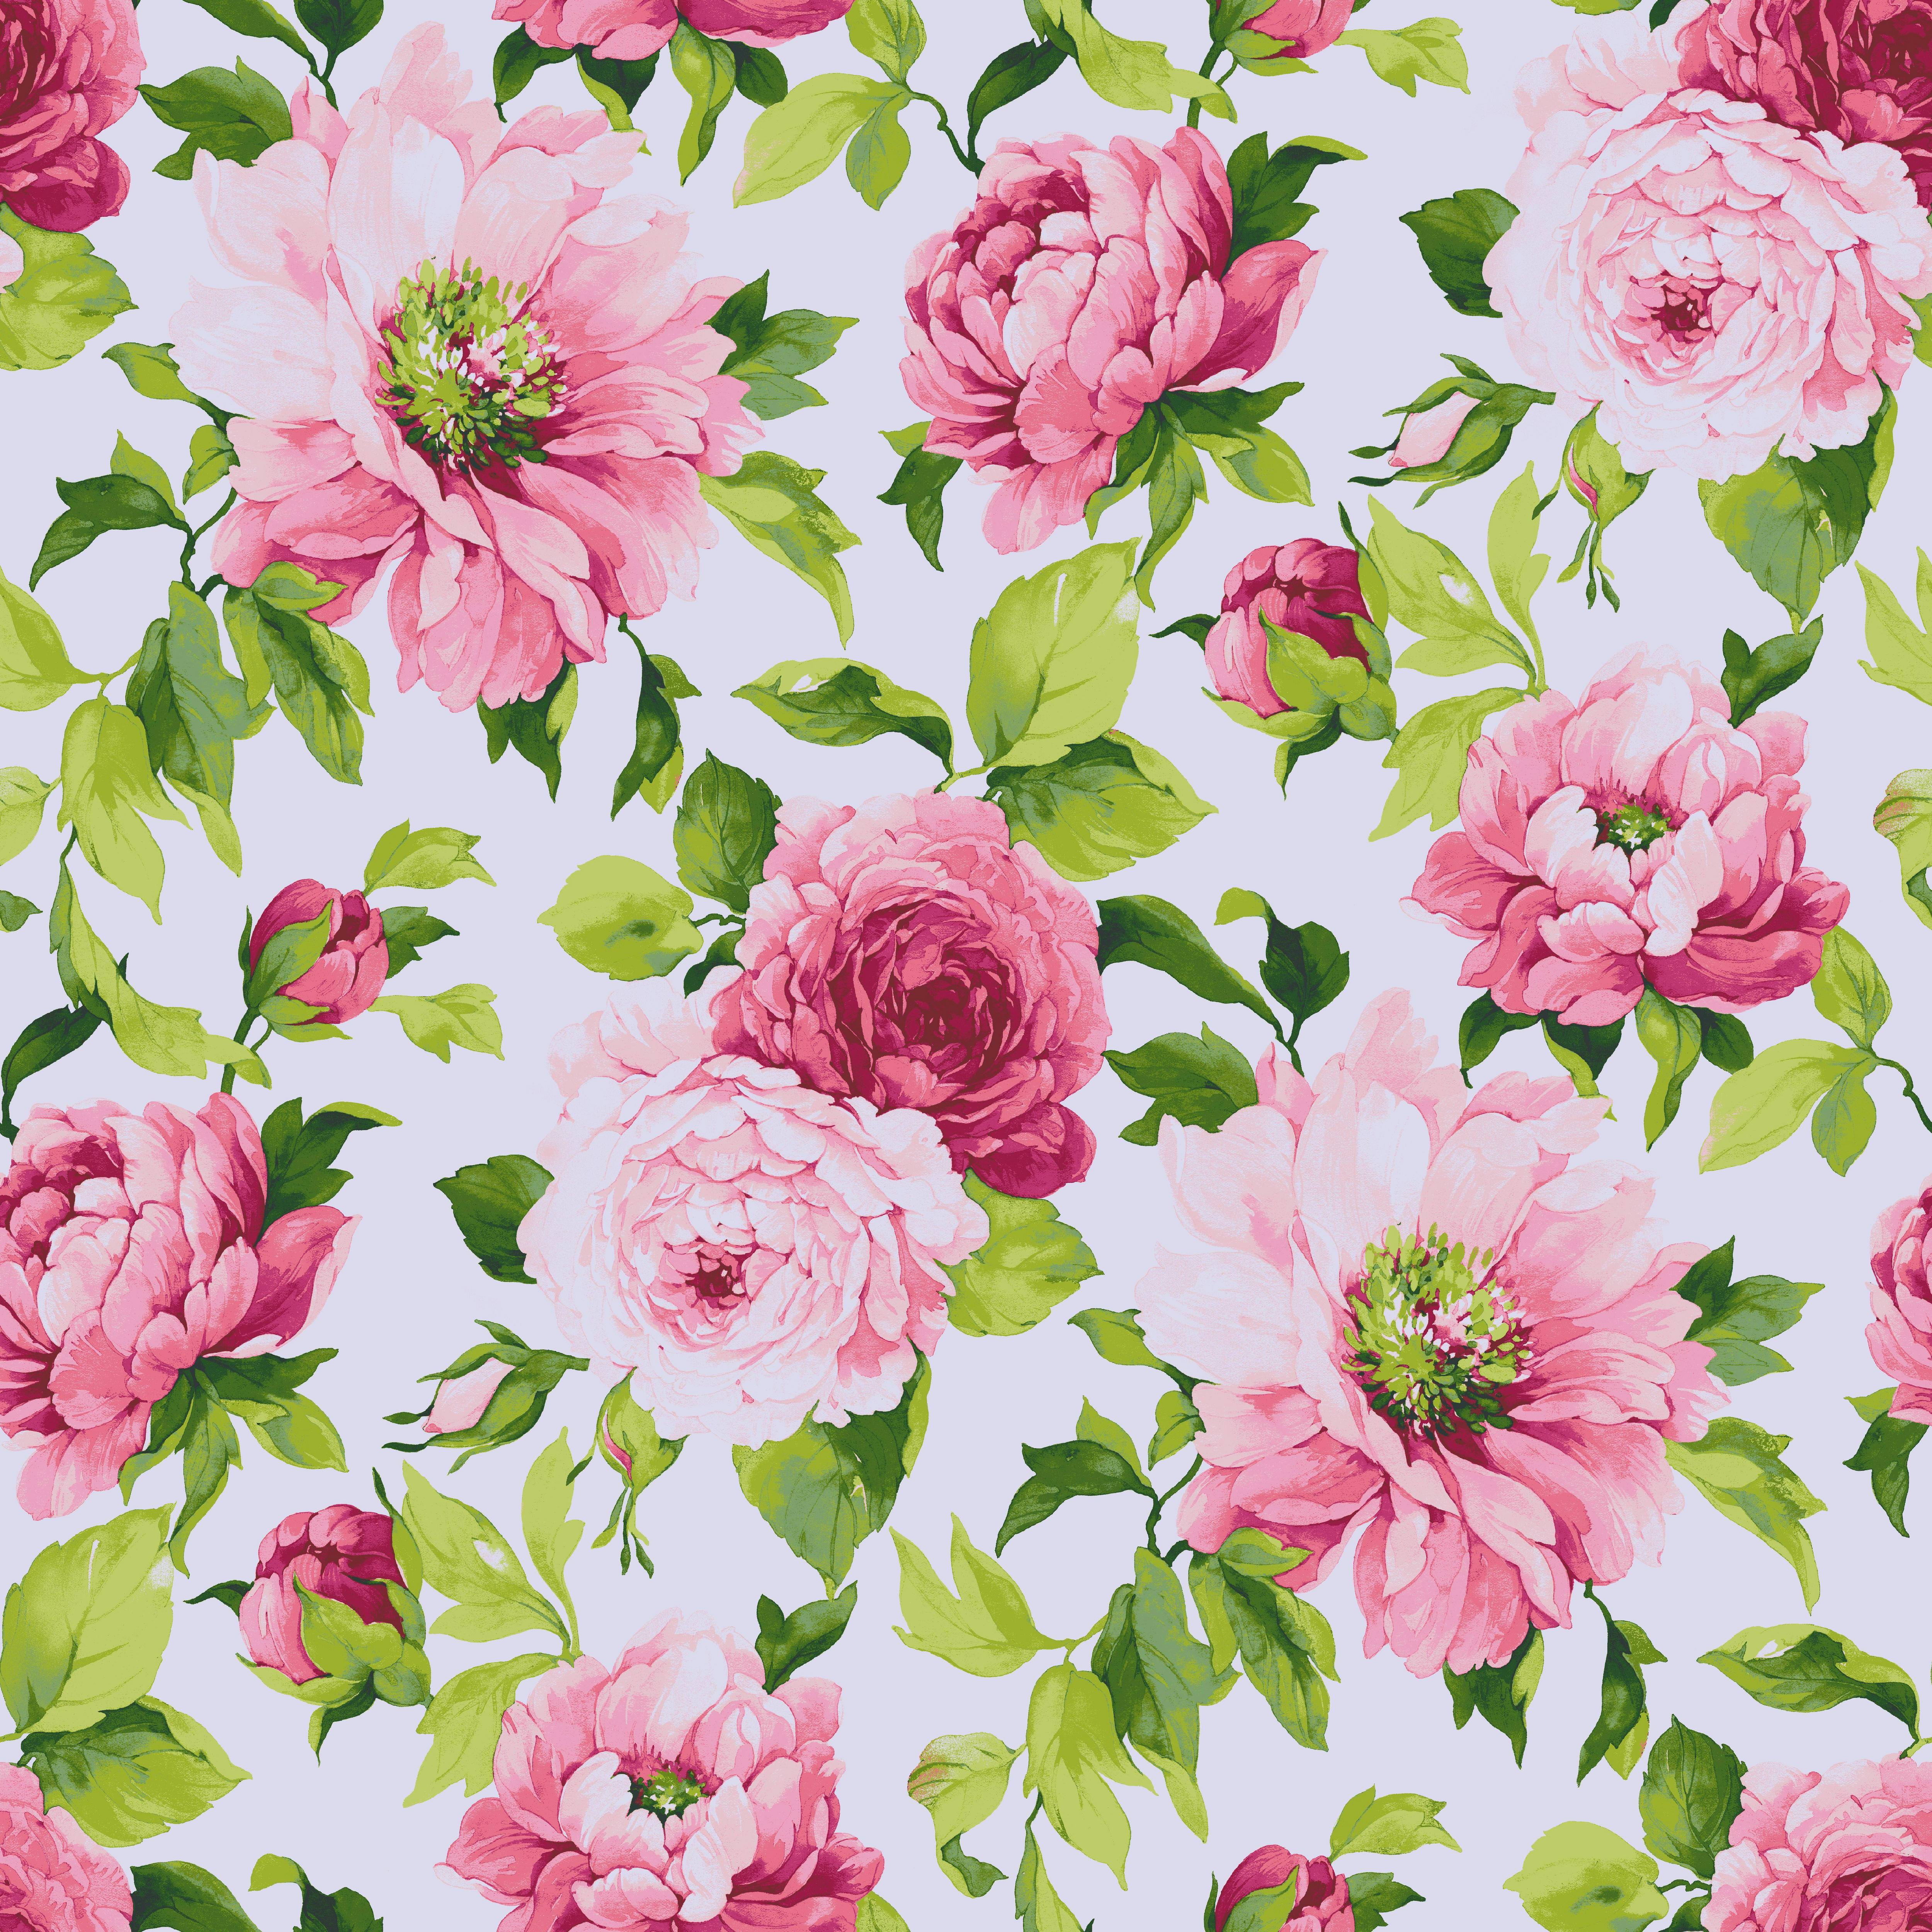 Pink Flowers on White Floral Cotton Flannel Fabric By The Yard 